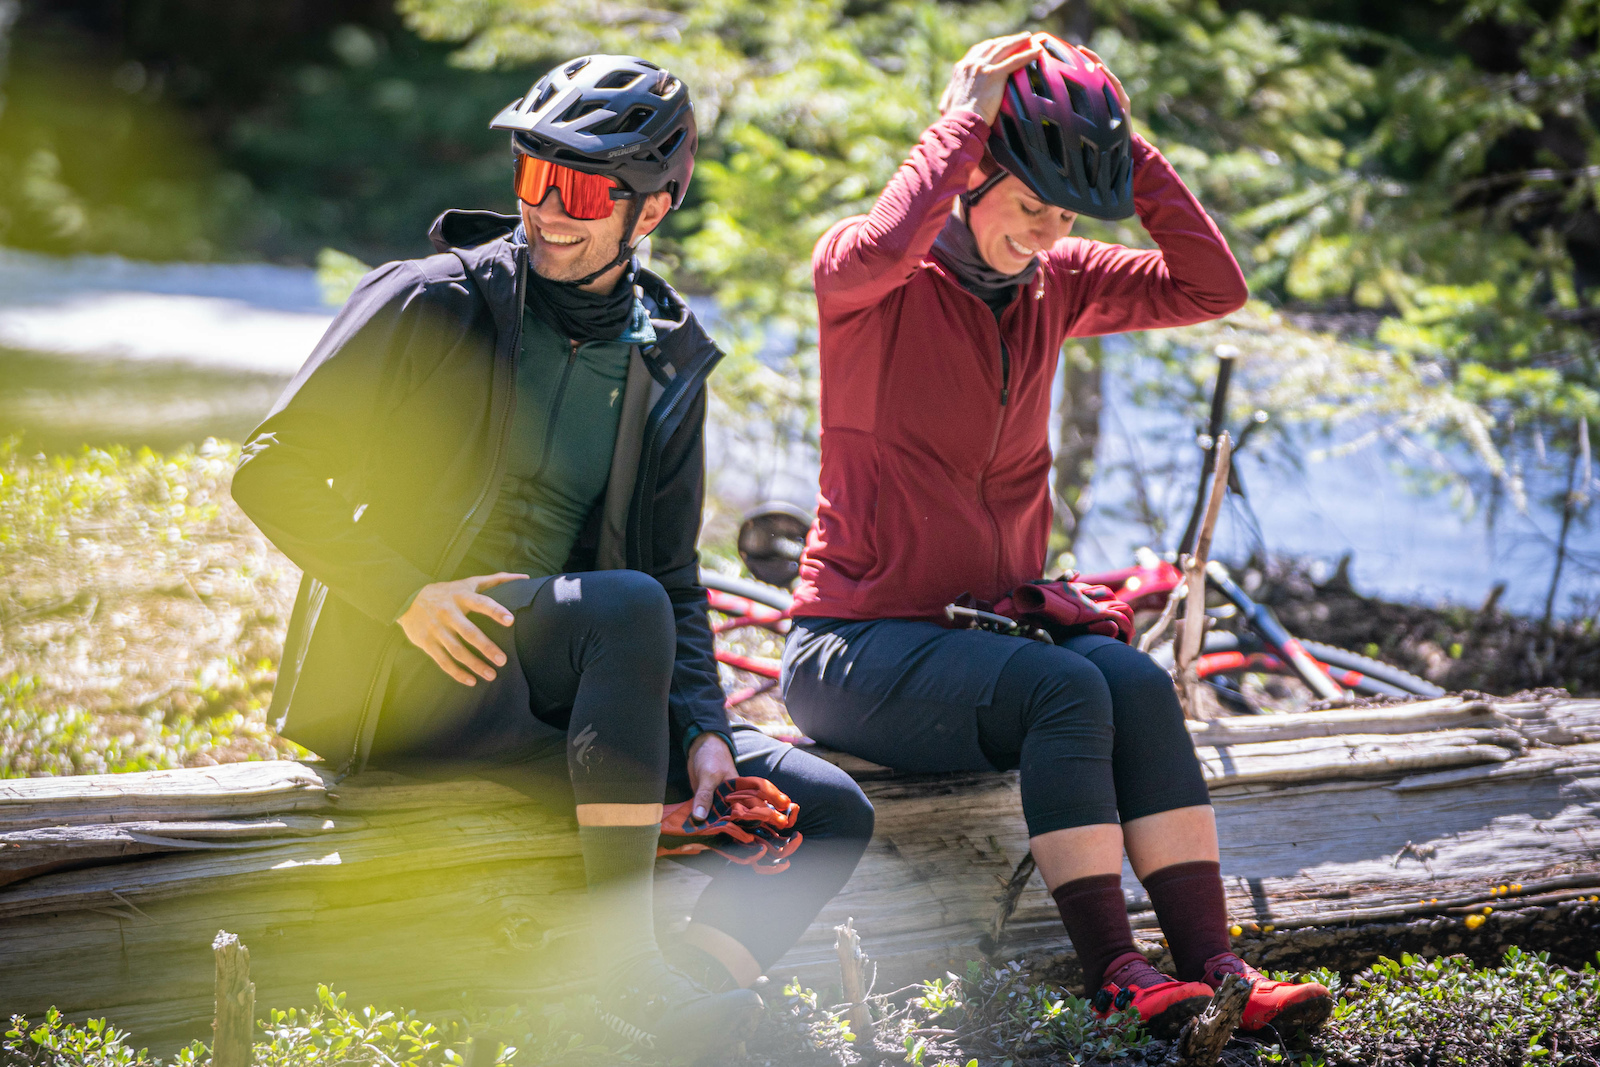 For Fall/Winter 20, we elevated our game to provide riders with a layering system fit to tackle everything fall and winter have to offer; cold, wet, cold and wet, brisk, dry, a sliver of sun, and everything in between.